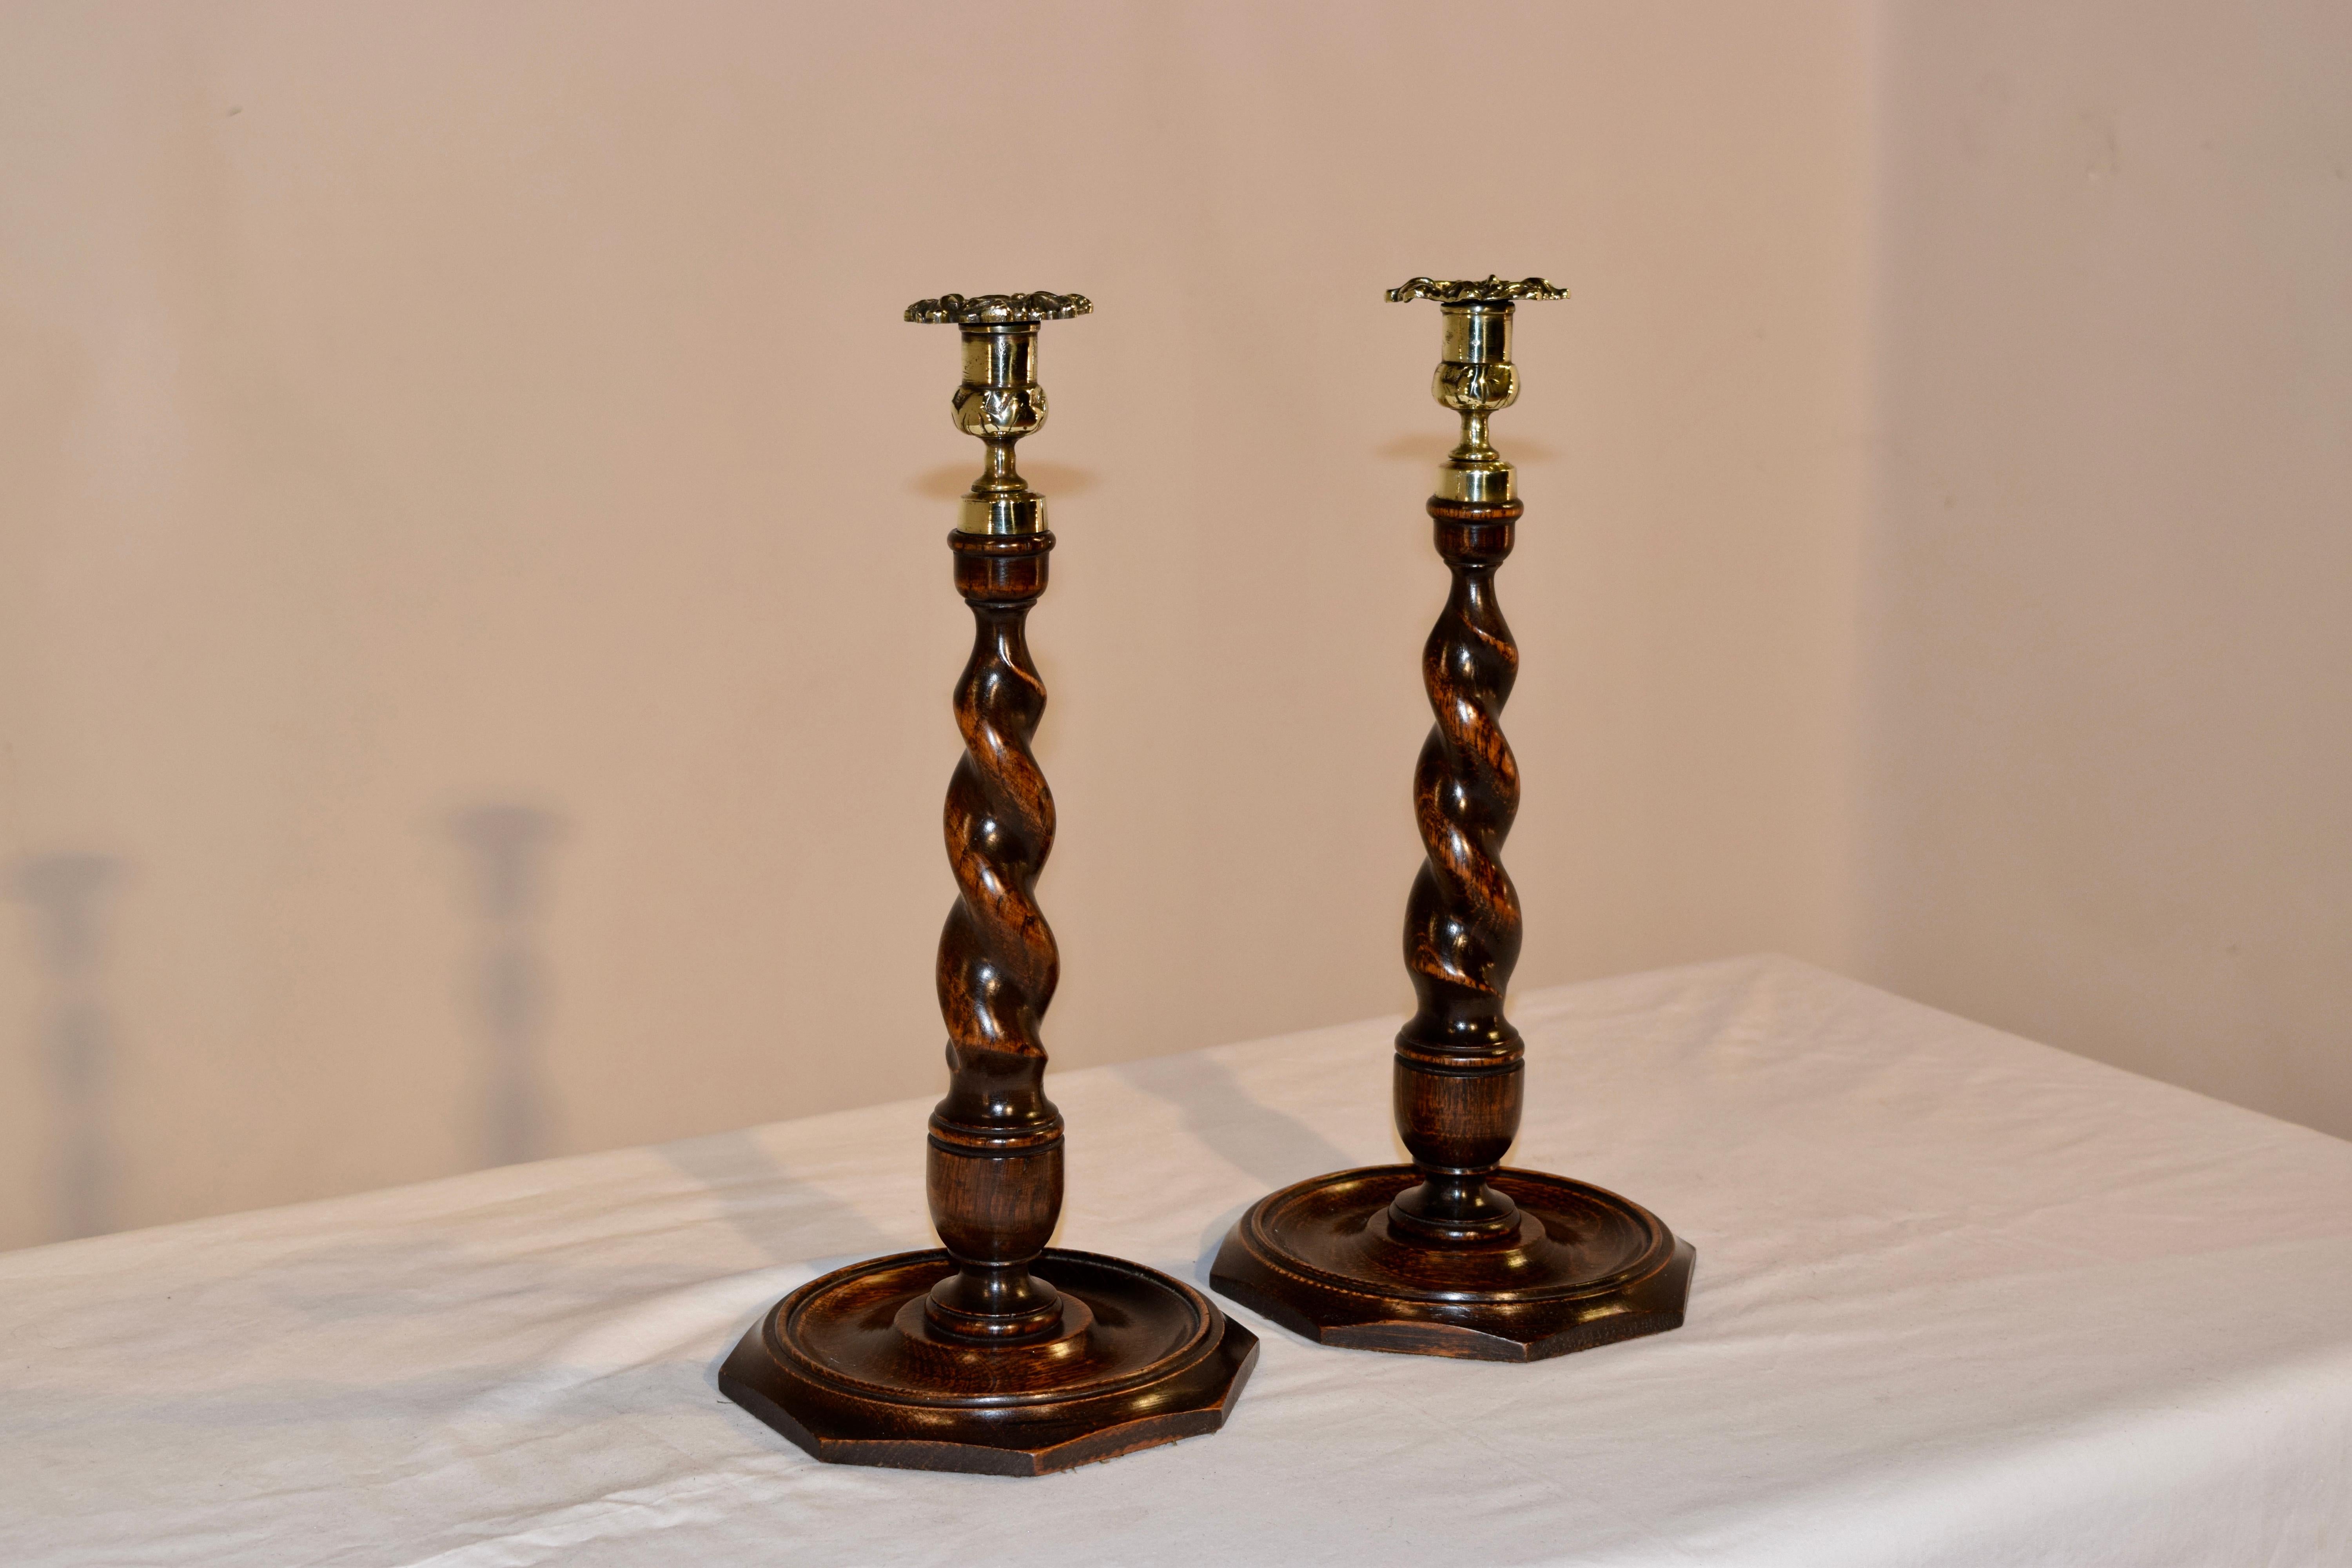 Pair of 19th century tall candlesticks from England made from oak. The candle cups are hand cast from brass and follow down to hand-turned graduated barley twist candlesticks with vase shaped turnings at the base, where they sit atop hand-turned